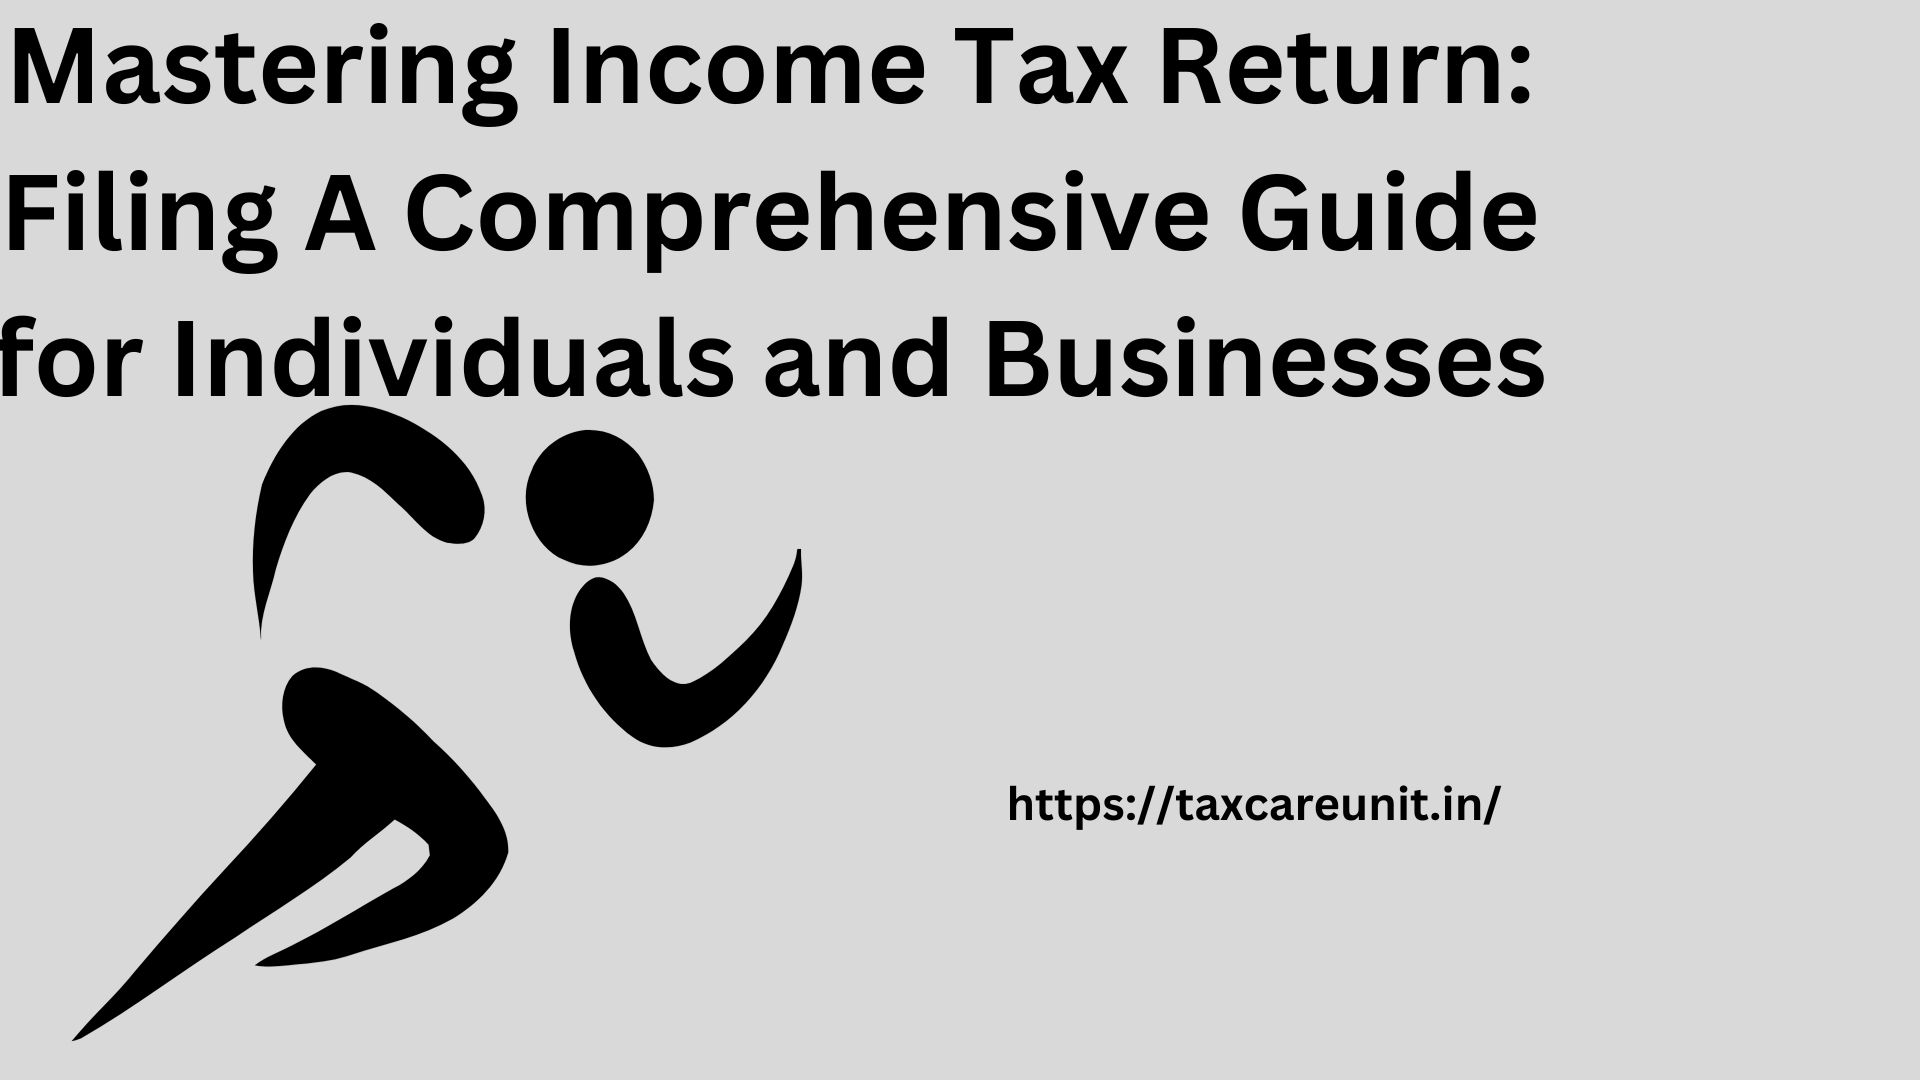 Mastering Income Tax Return Filing A Comprehensive Guide for Individuals and Businesses